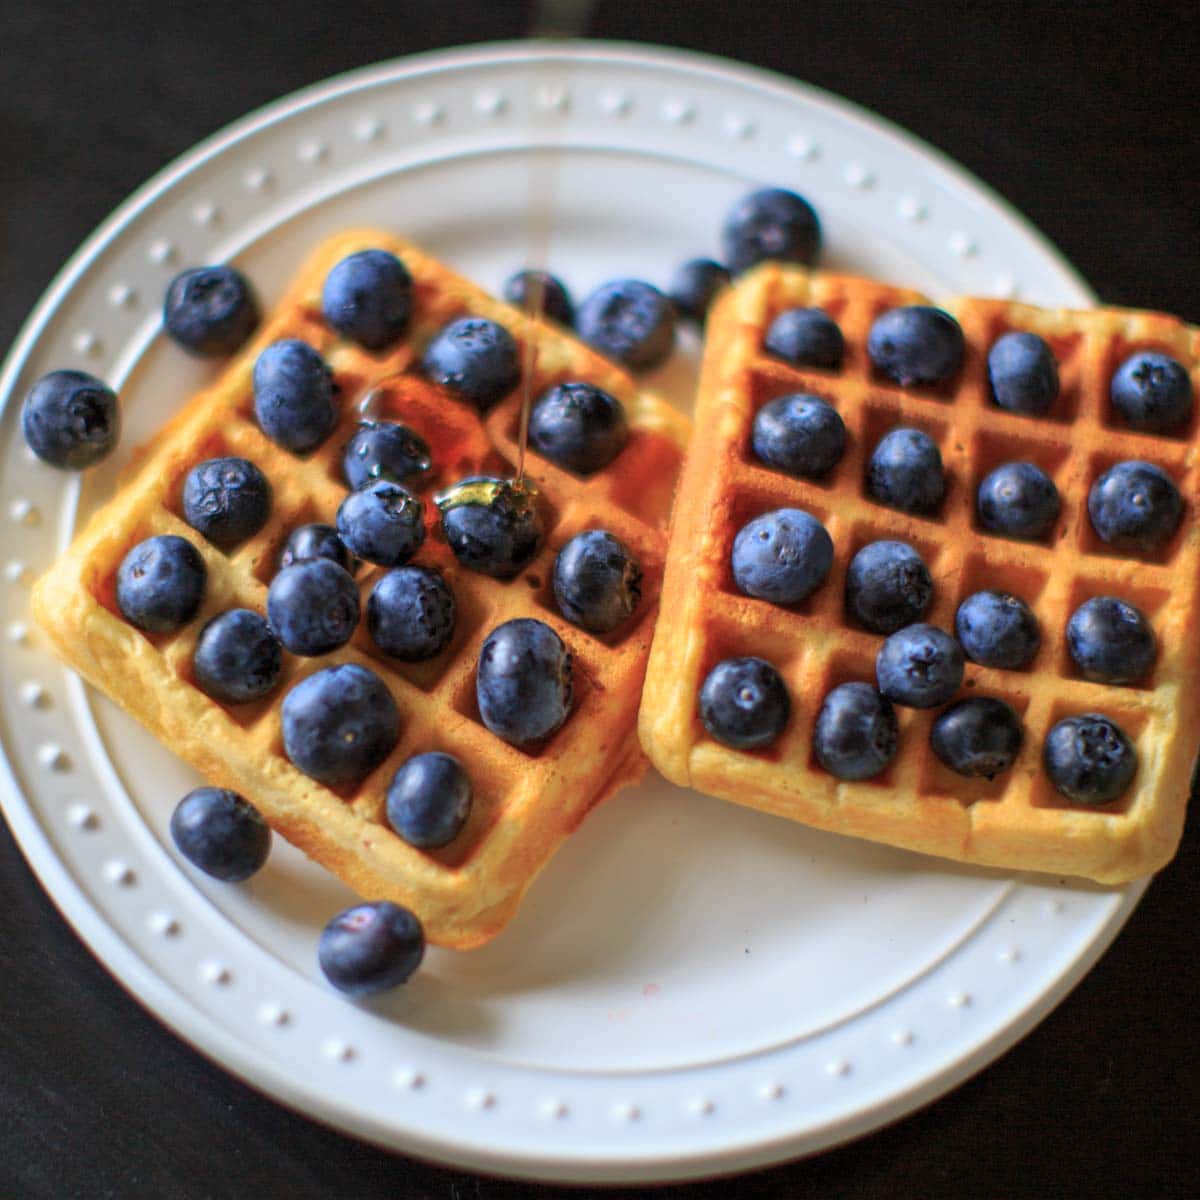 Belgian Waffles made healthy with split red lentils, blood orange juice and blueberries. Breakfast doesn't get any better than this!